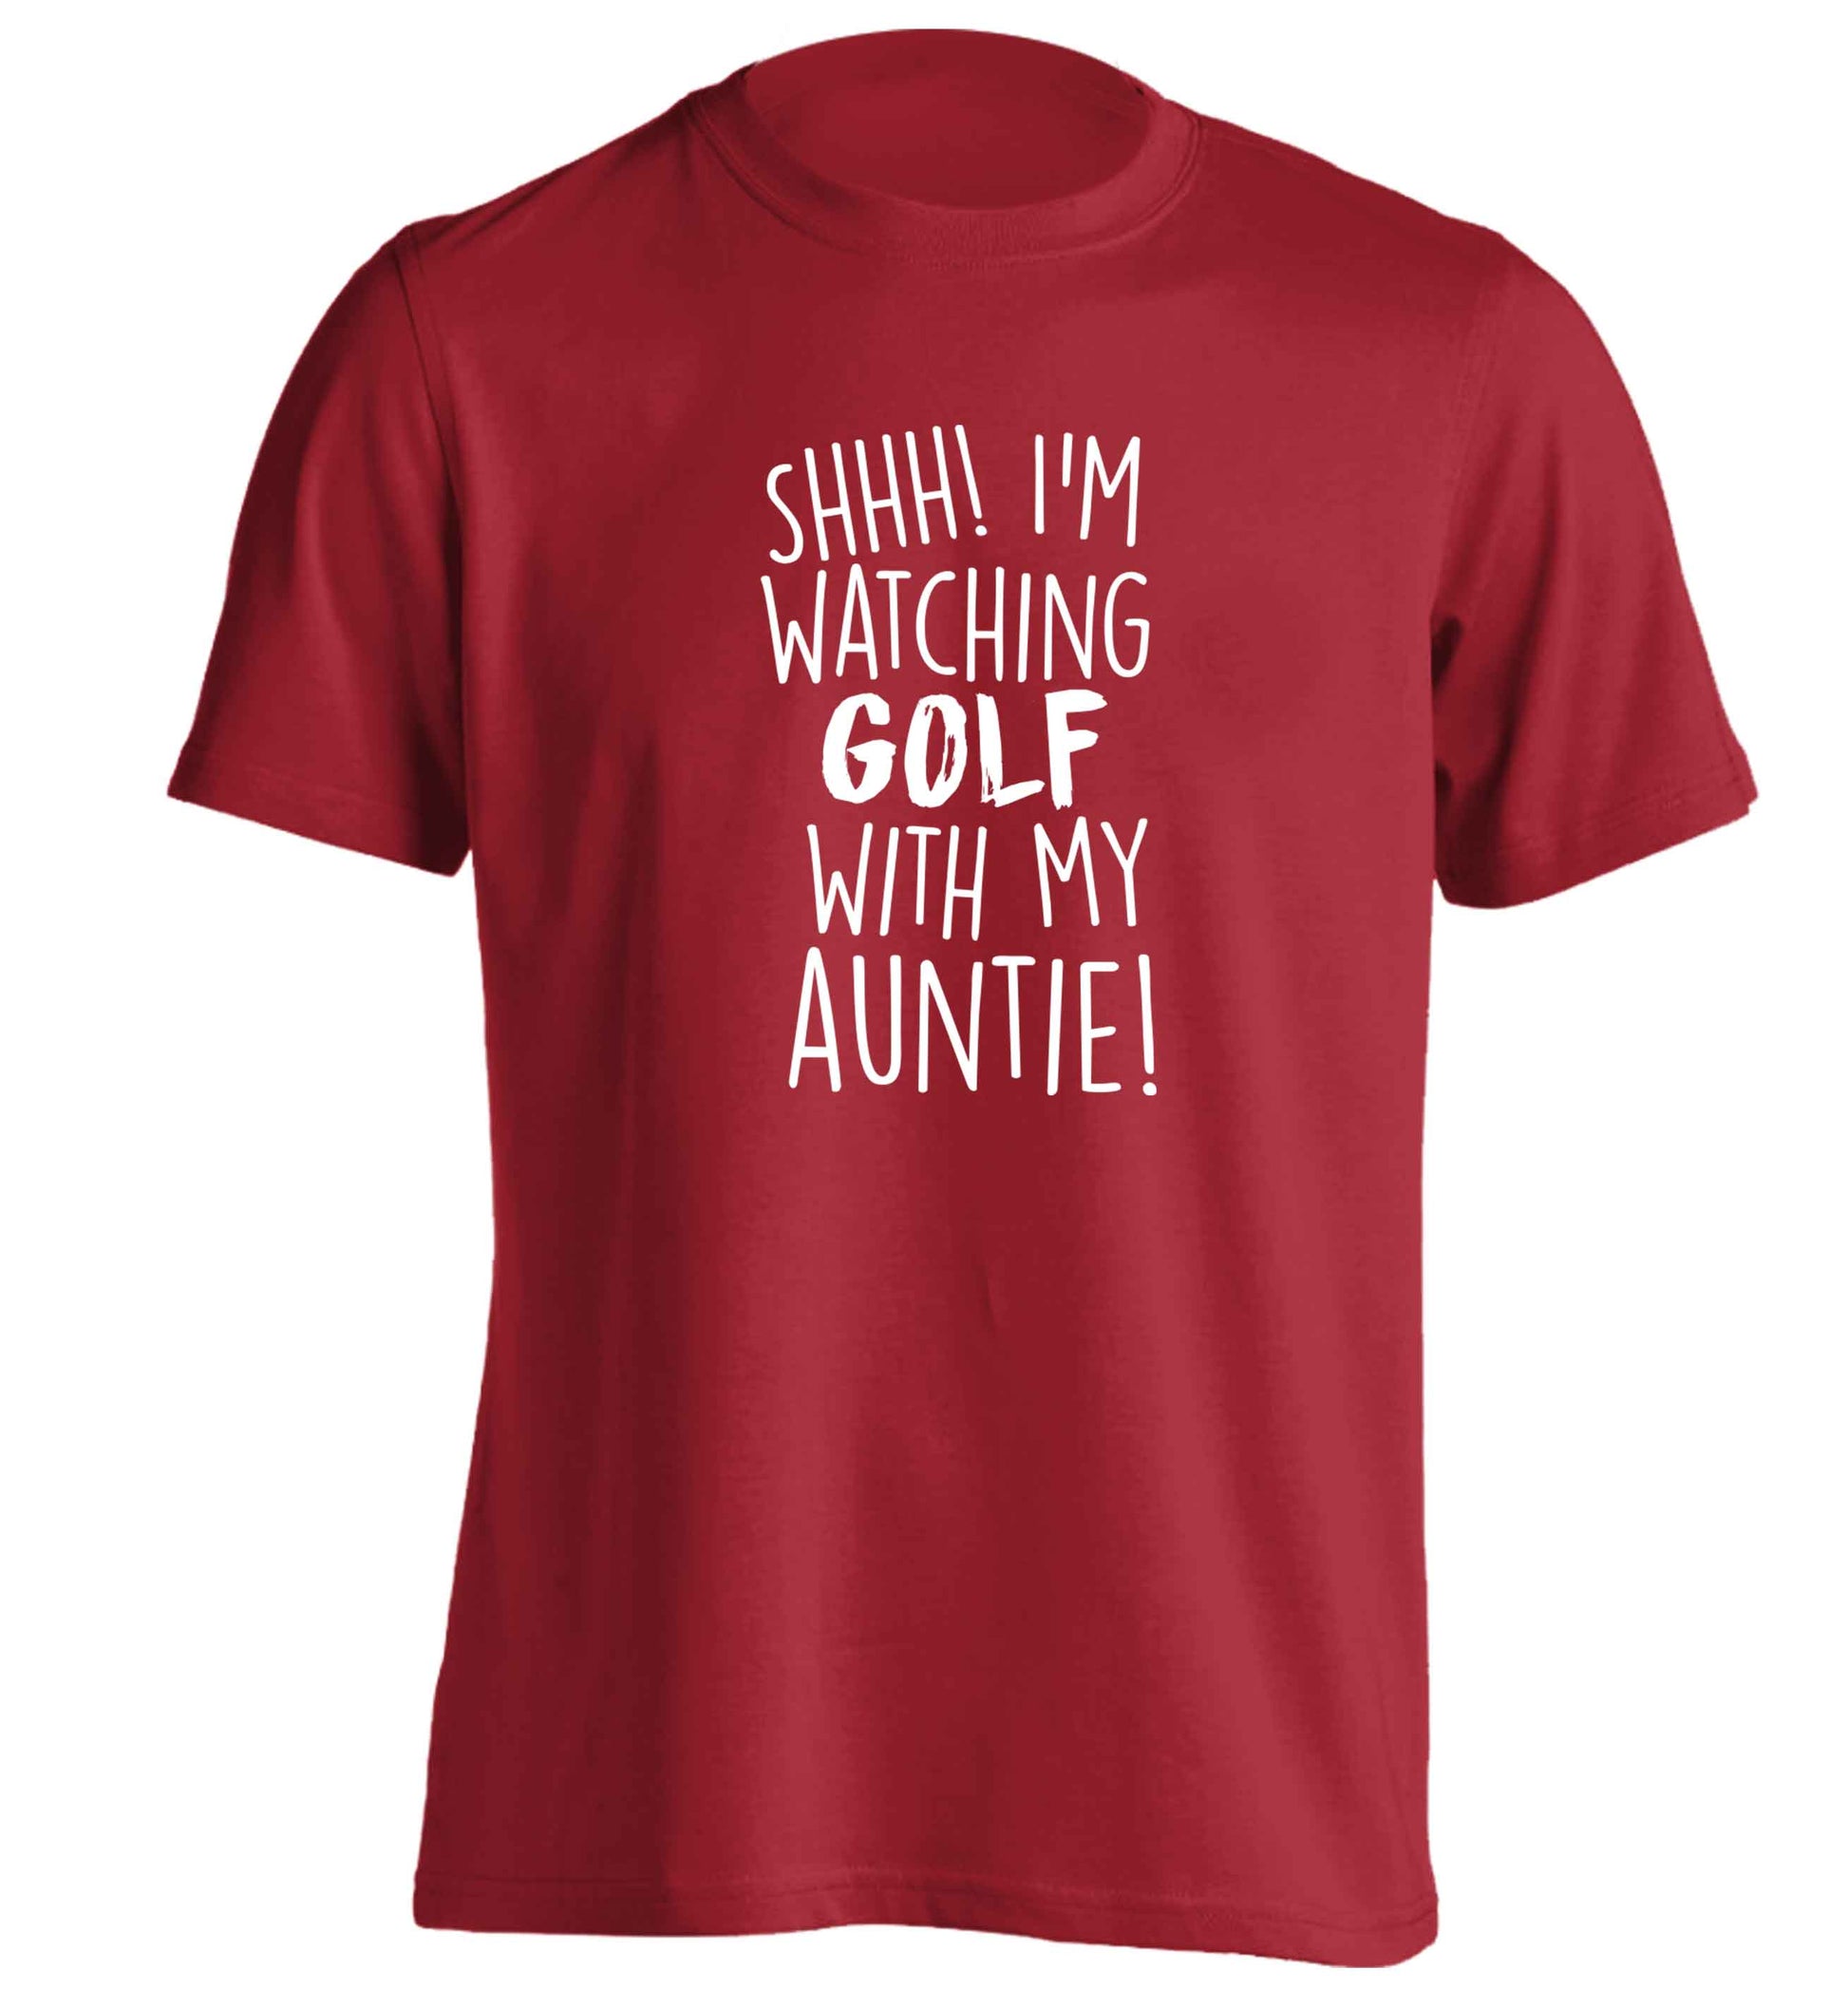 Shh I'm watching golf with my auntie adults unisex red Tshirt 2XL